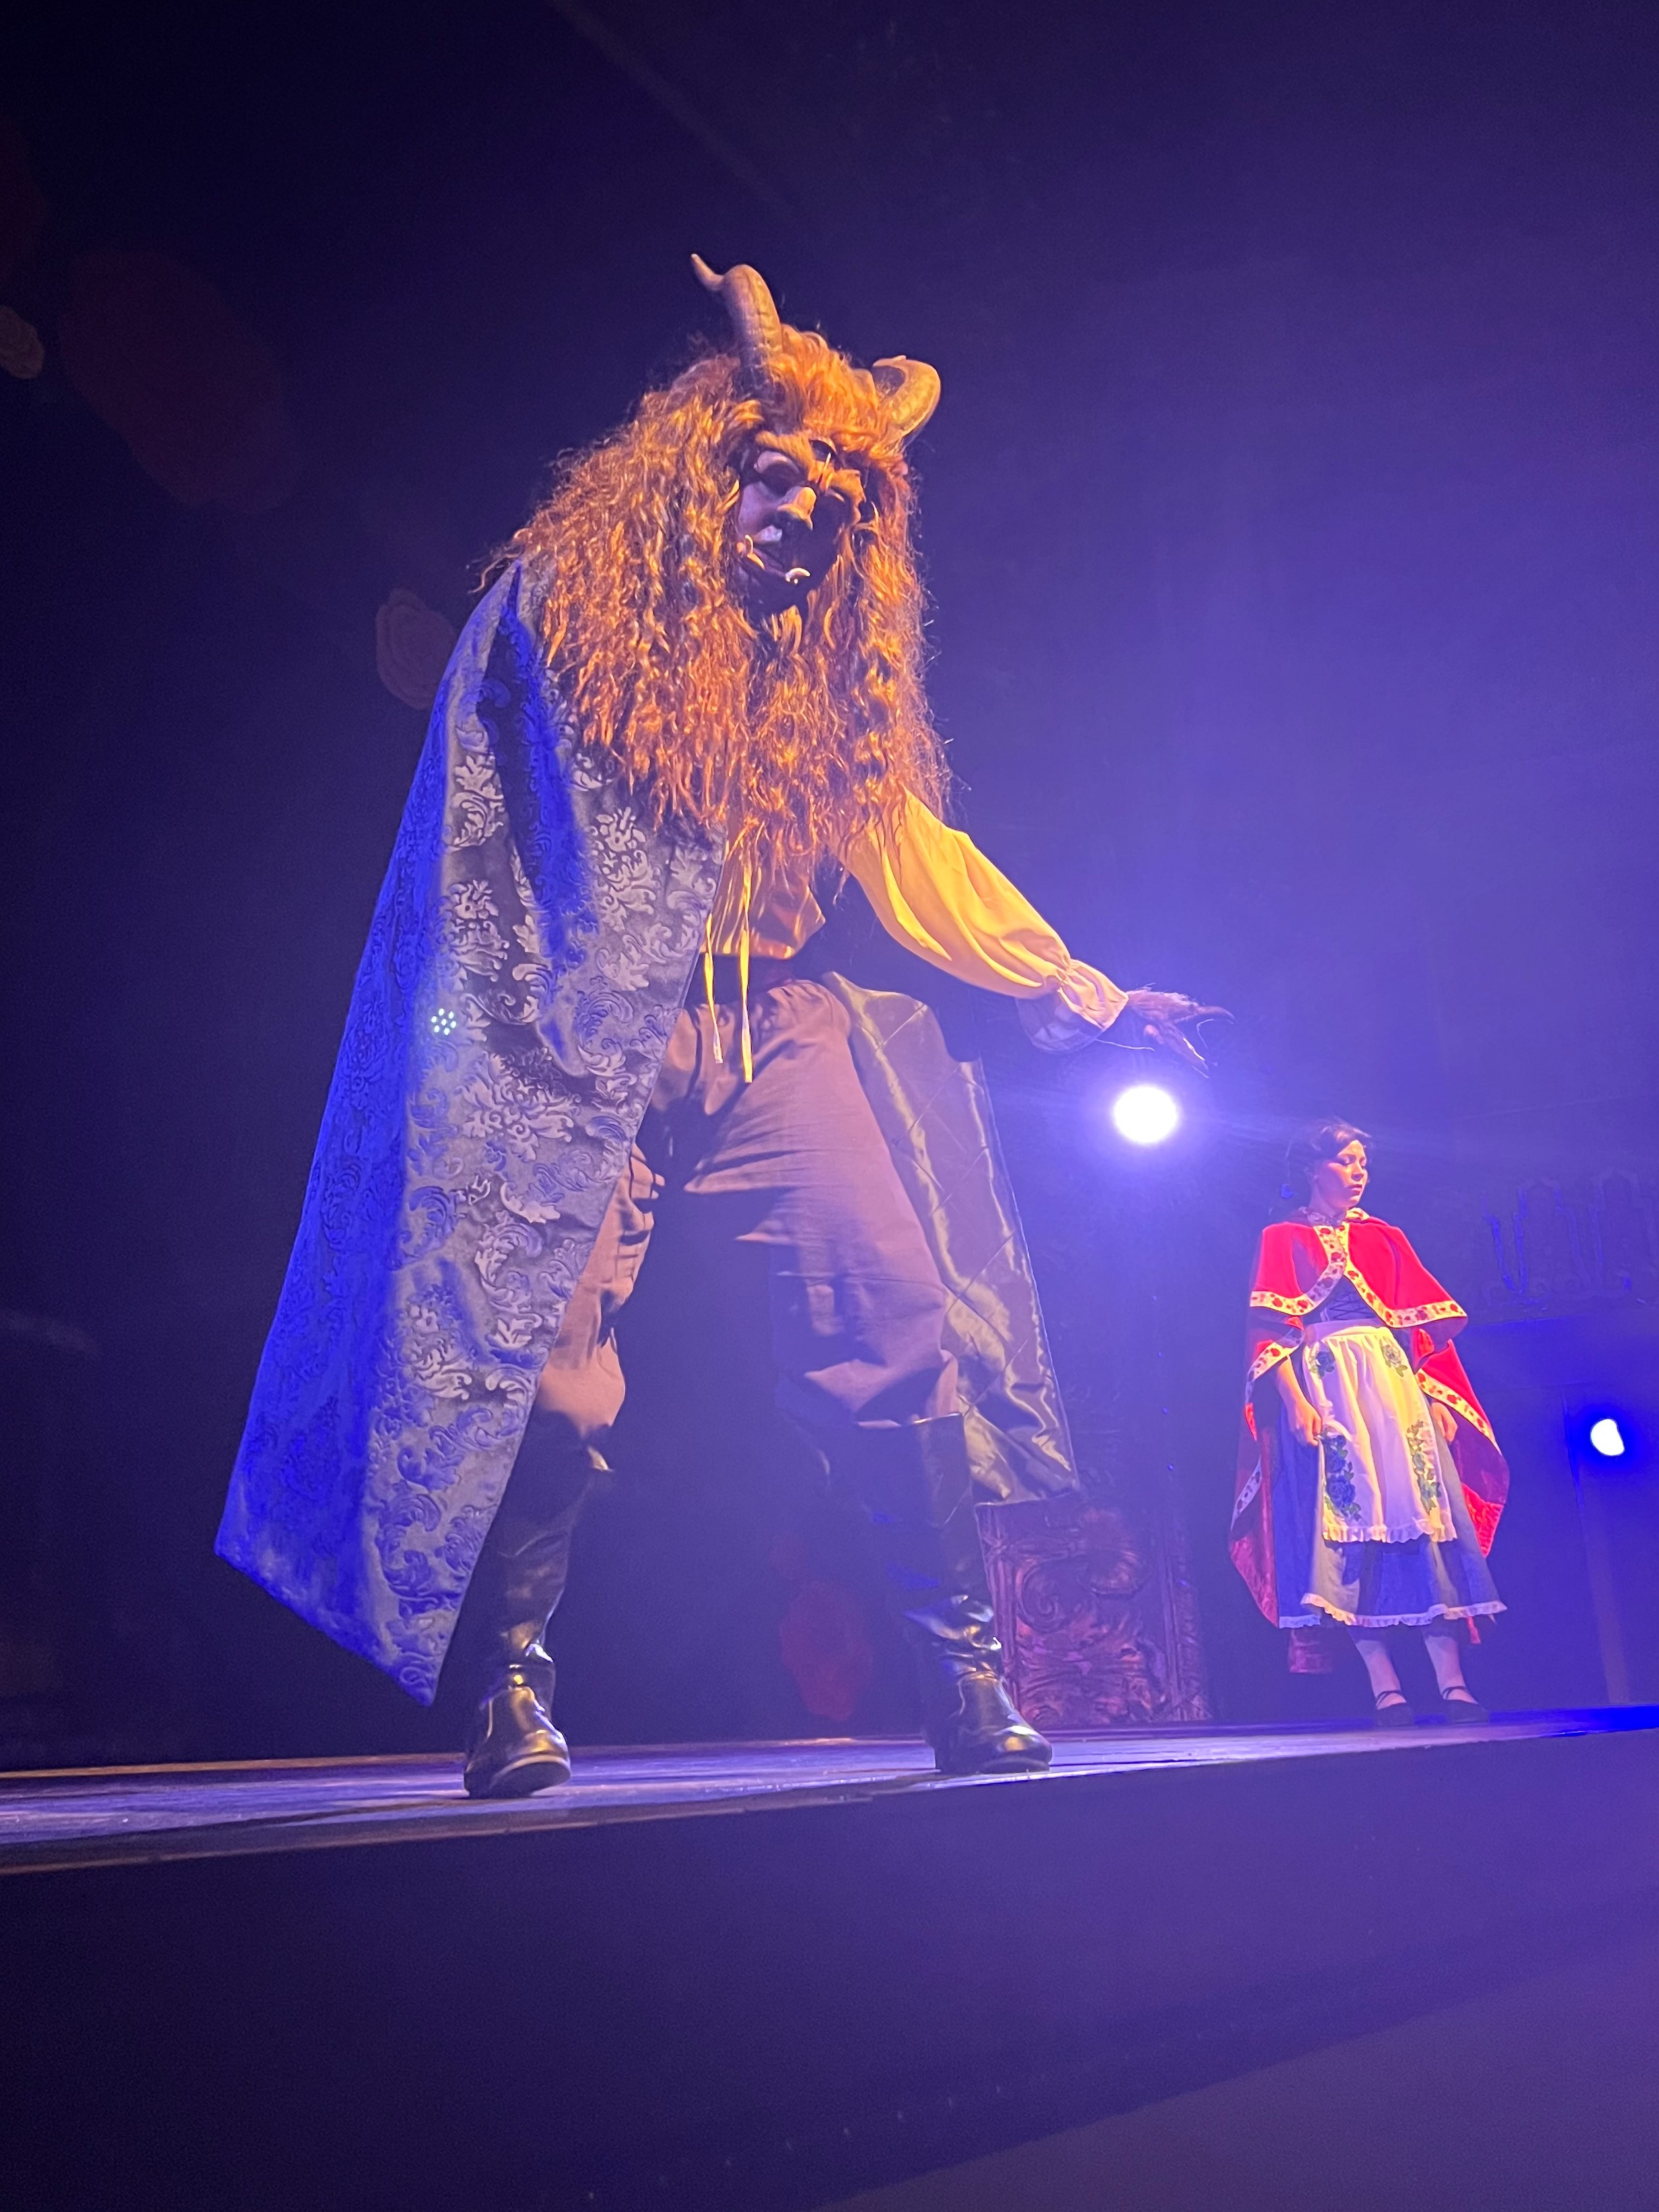 A scene from the musical "Beauty and the Beast"